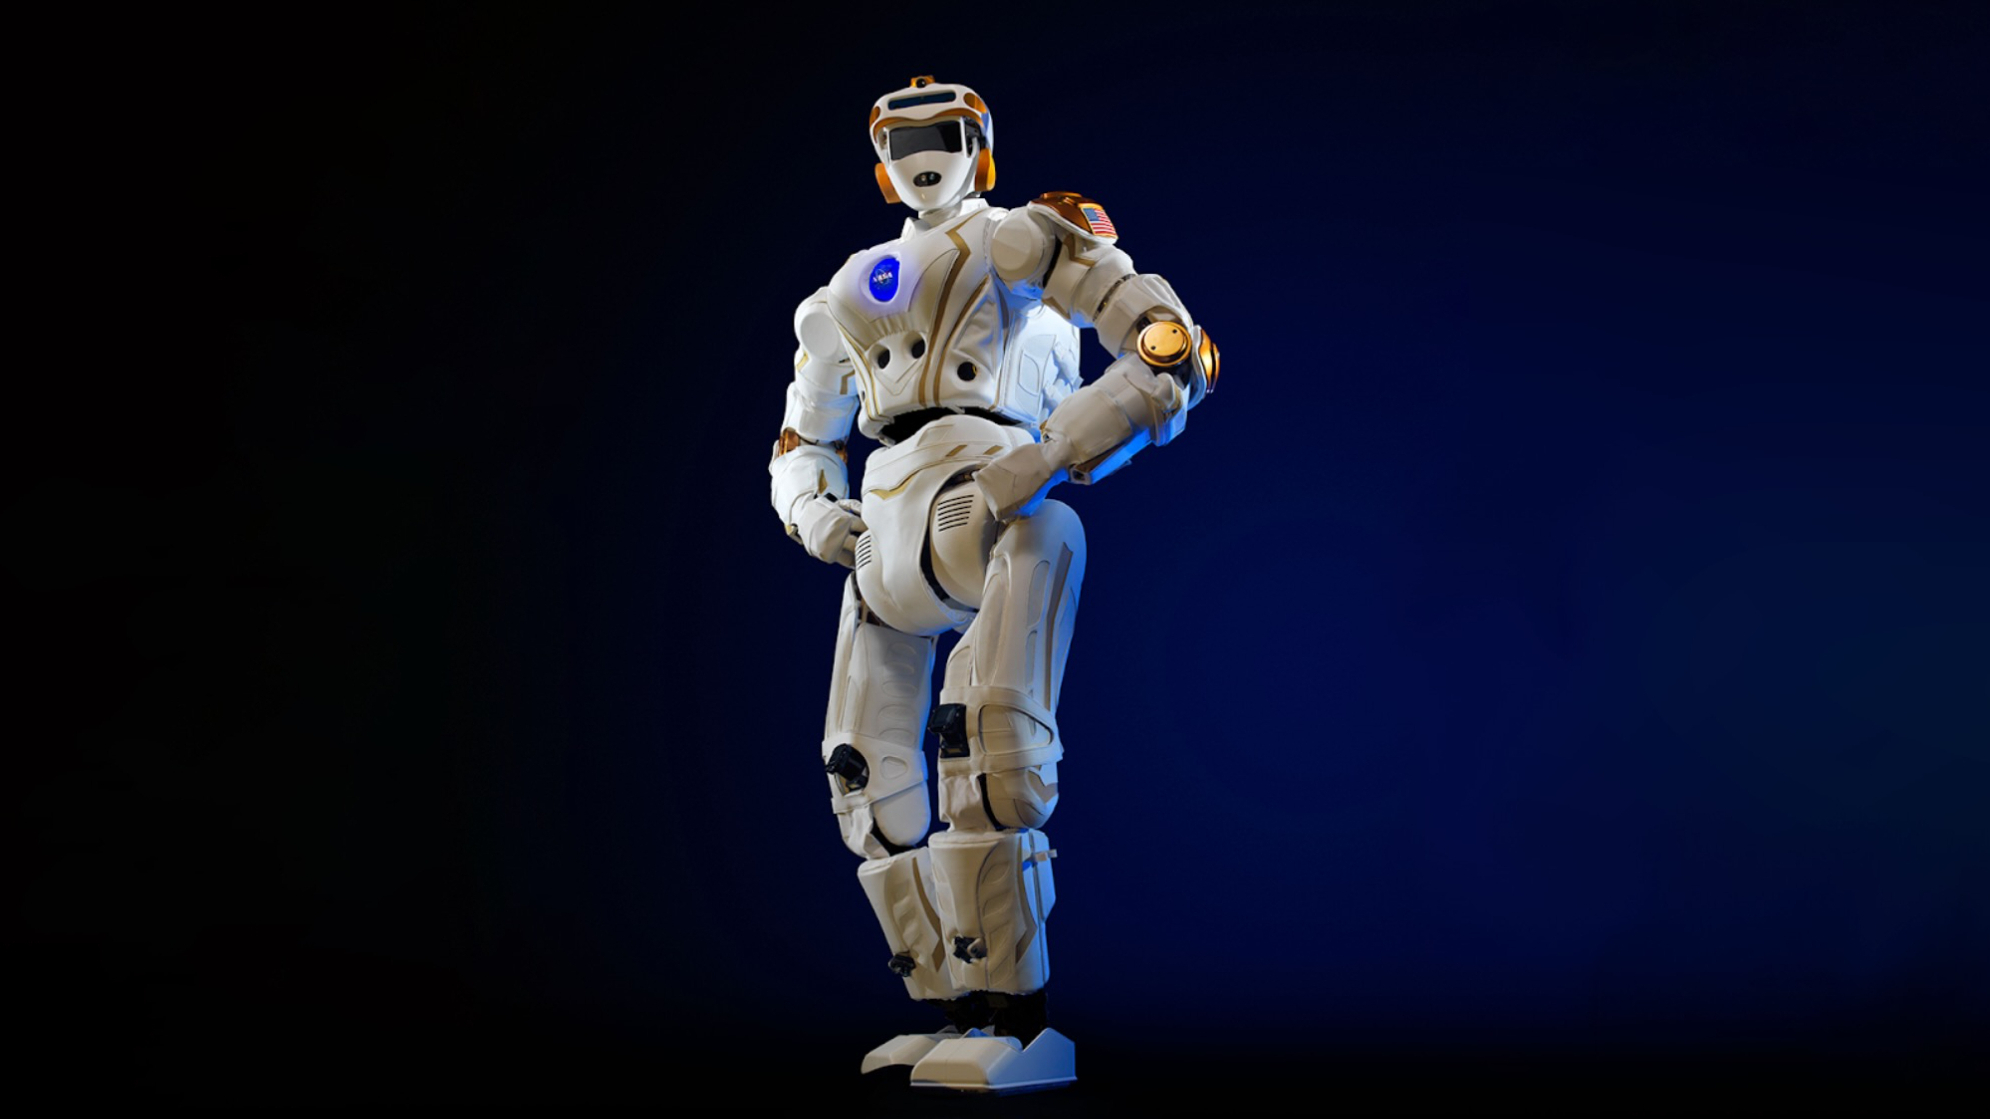 a white and gold humanoid robot stands with its hands on its hips against a dark-blue background.